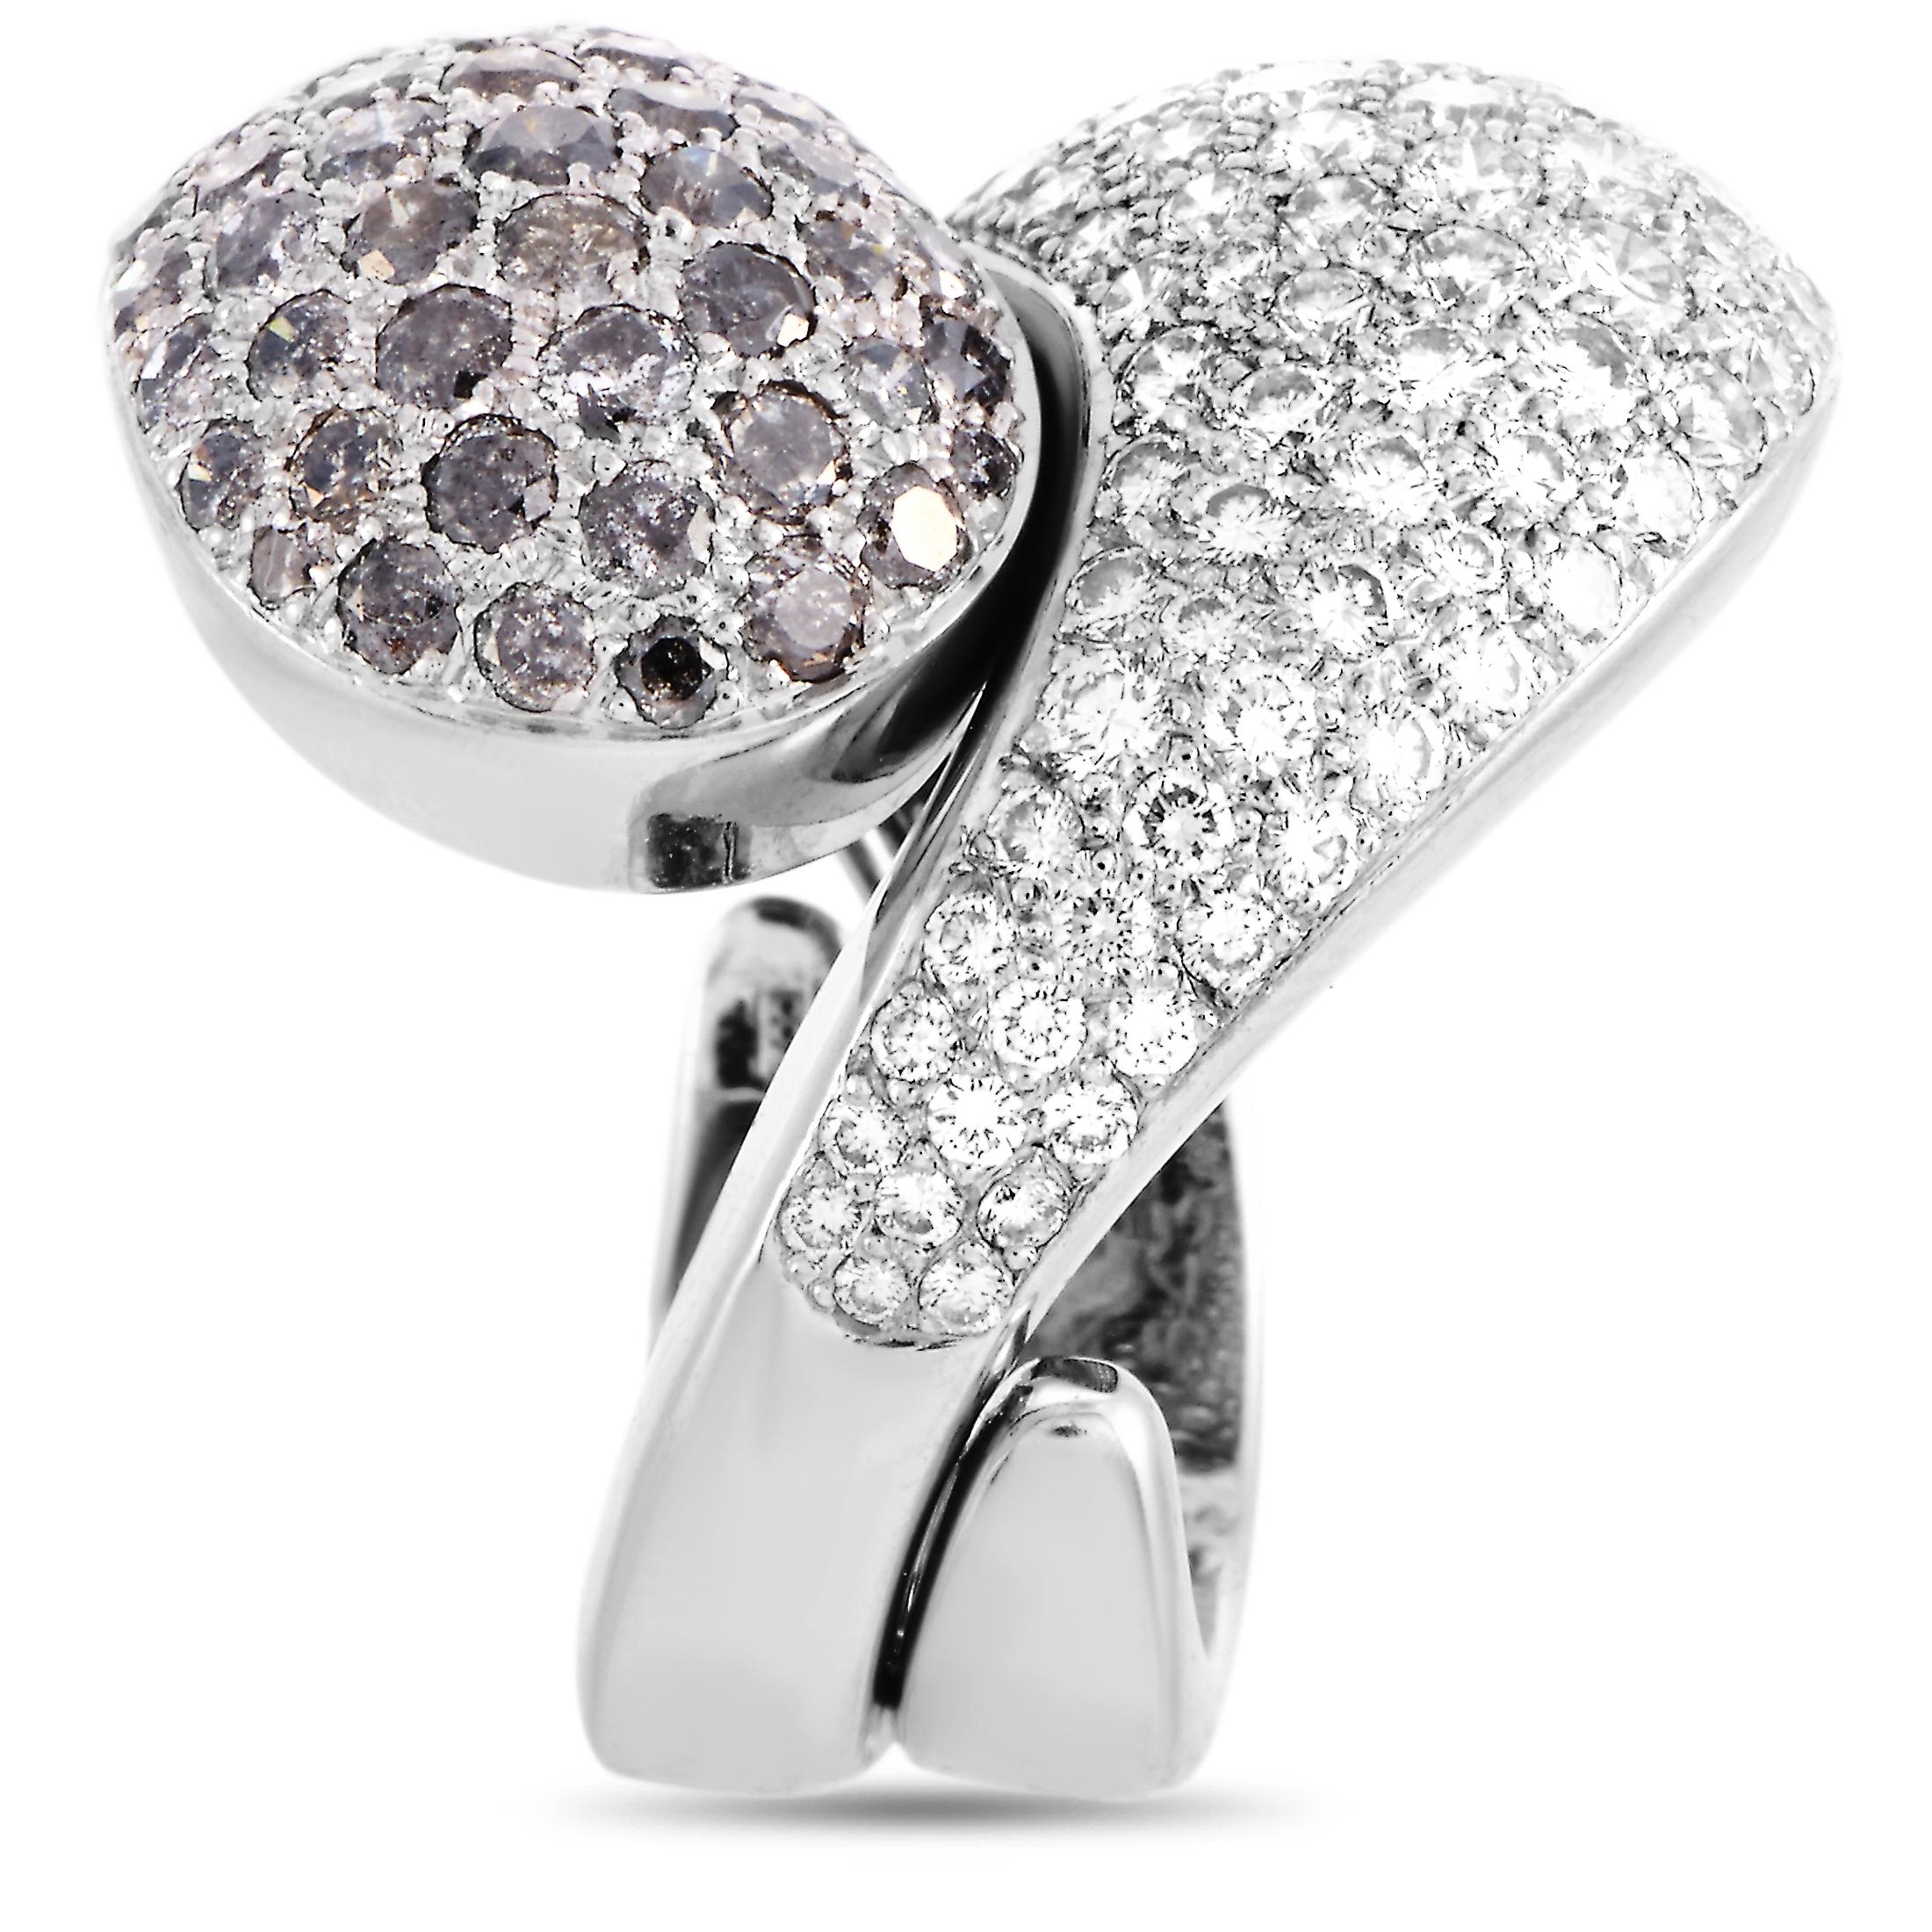 The Cartier “Le Yin et Le Yang” ring is made of 18K white gold and embellished with white and black diamonds. The ring weighs 19.9 grams, boasting band thickness of 8 mm and top height of 6 mm, while top dimensions measure 25 by 20 mm.
 
 Offered in